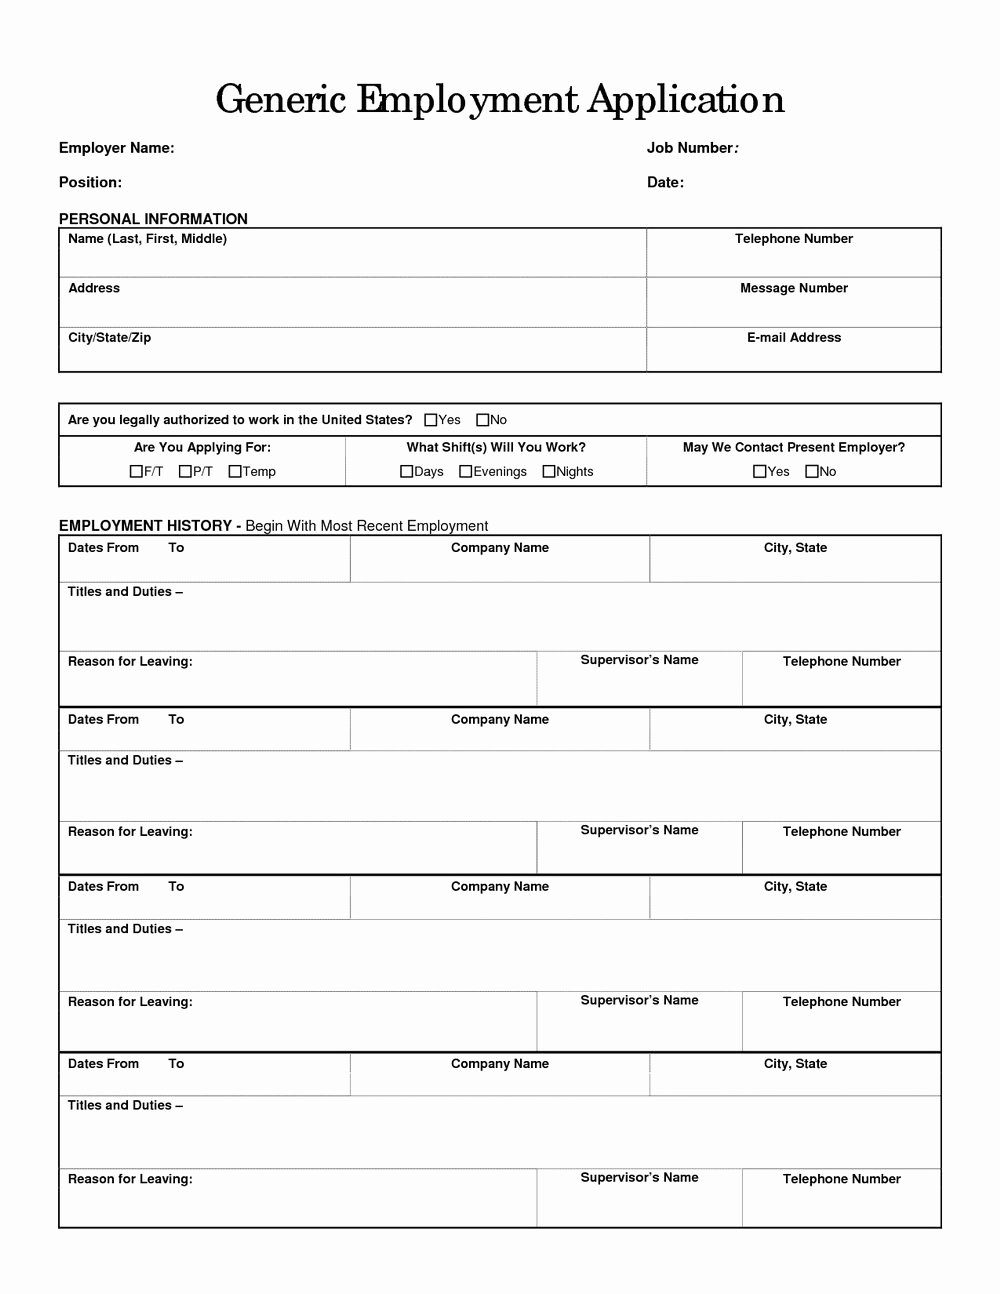 General Job Application form Awesome Free Printable Generic Job Application form